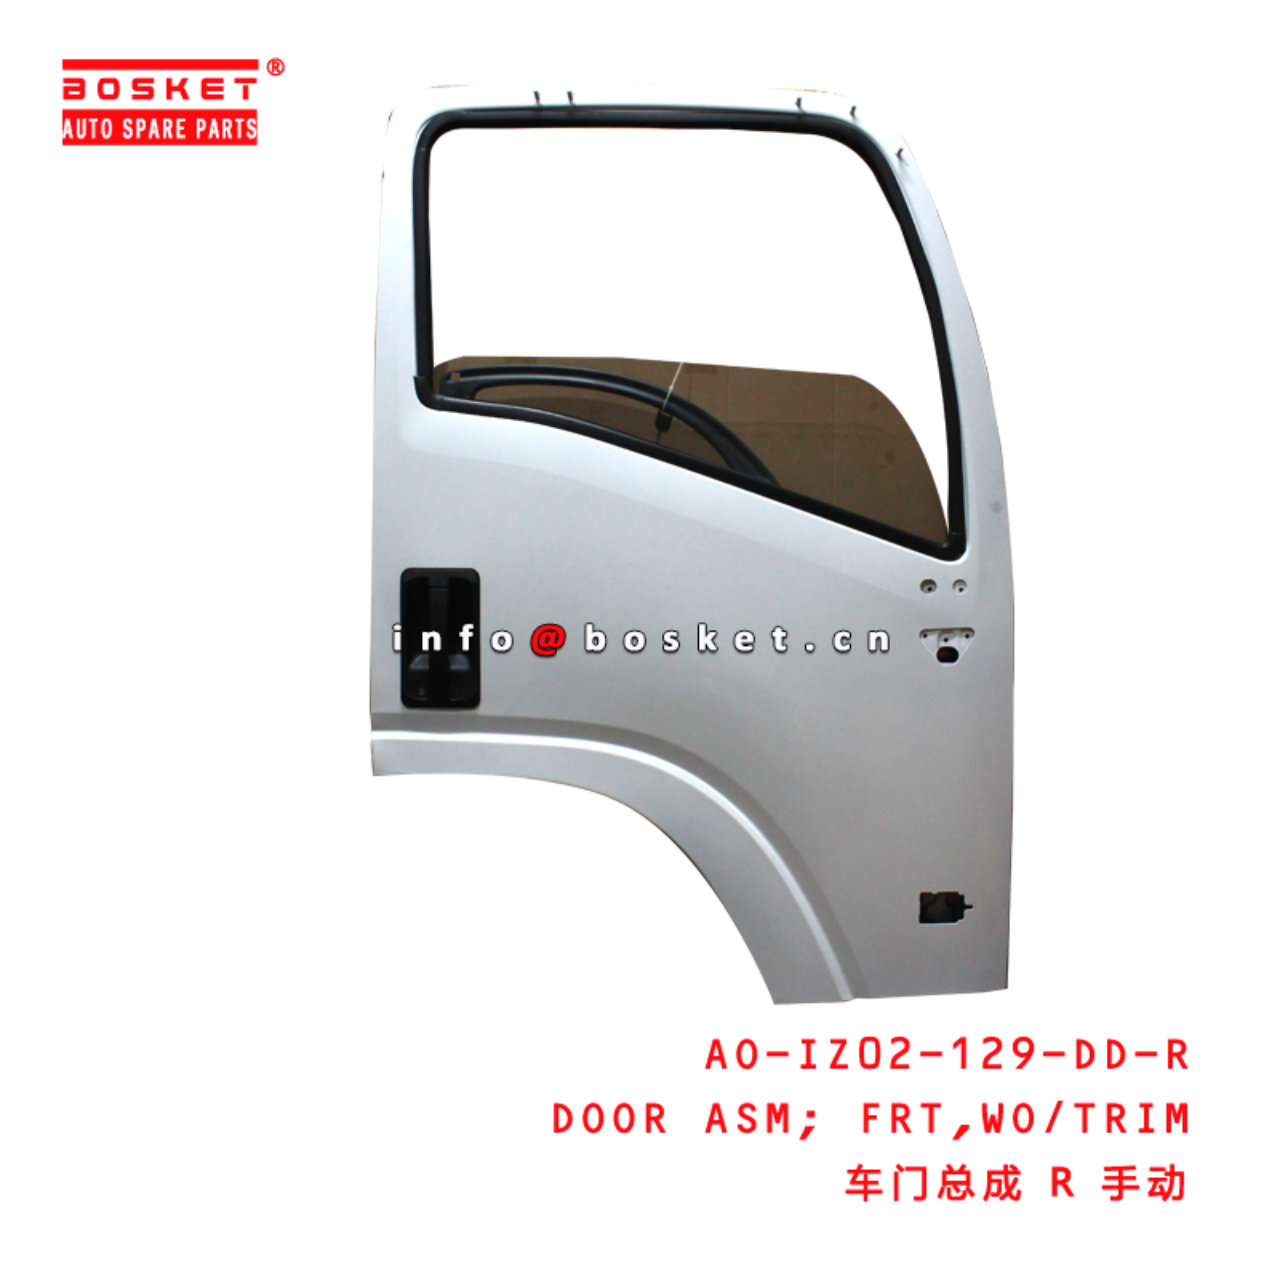 AO-IZ02-129-DD-R Without Trim Frt Door Assembly Suitable for ISUZU